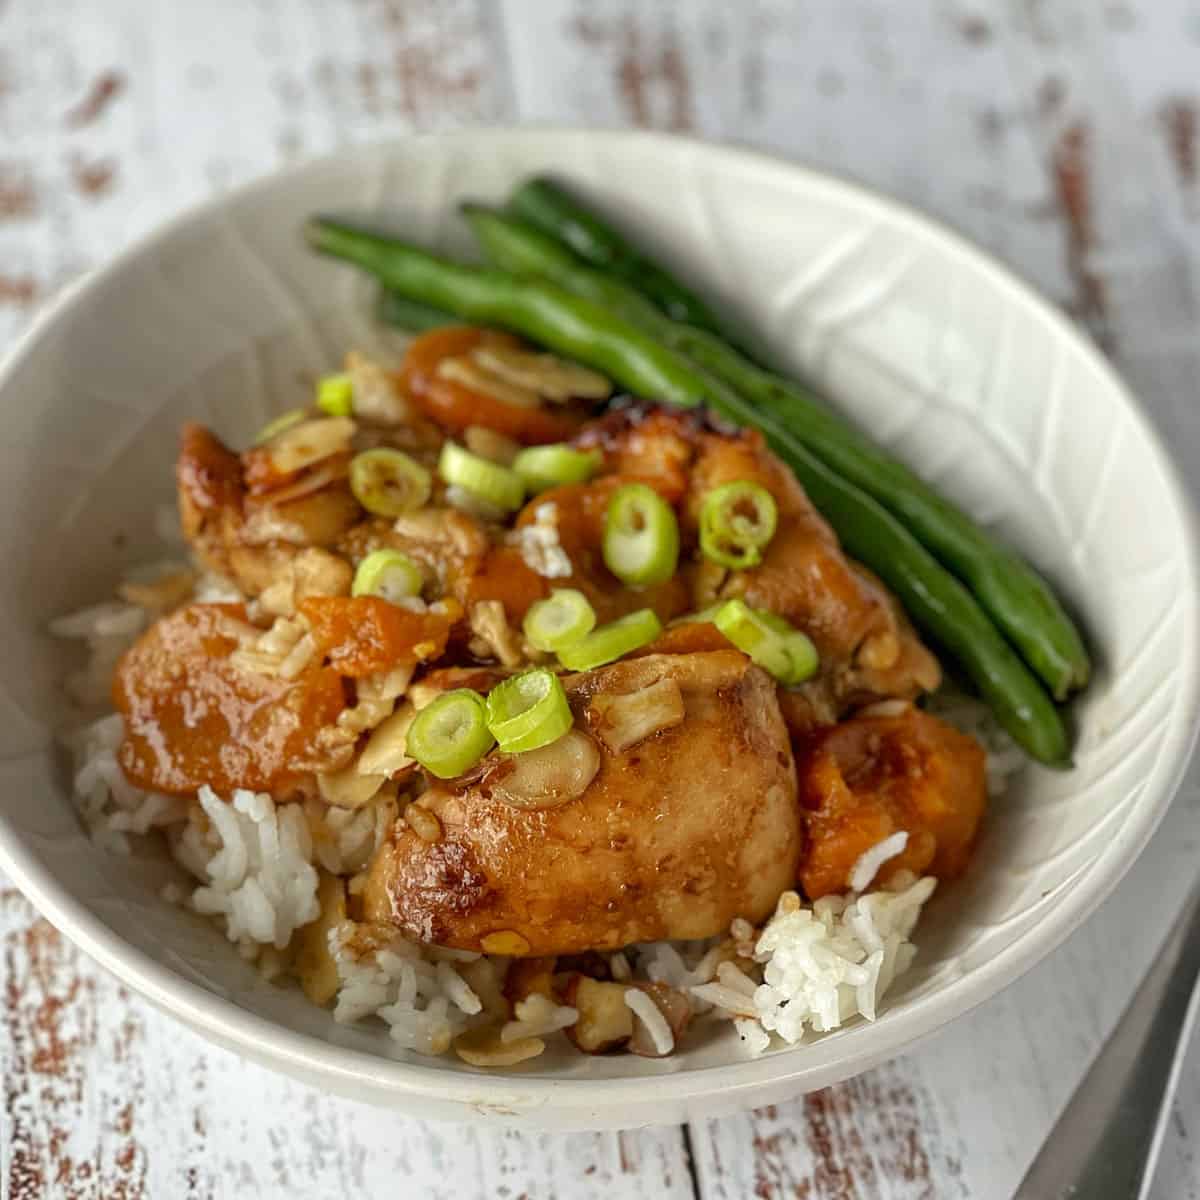 Apricot chicken served with rice and beans in a white bowl.